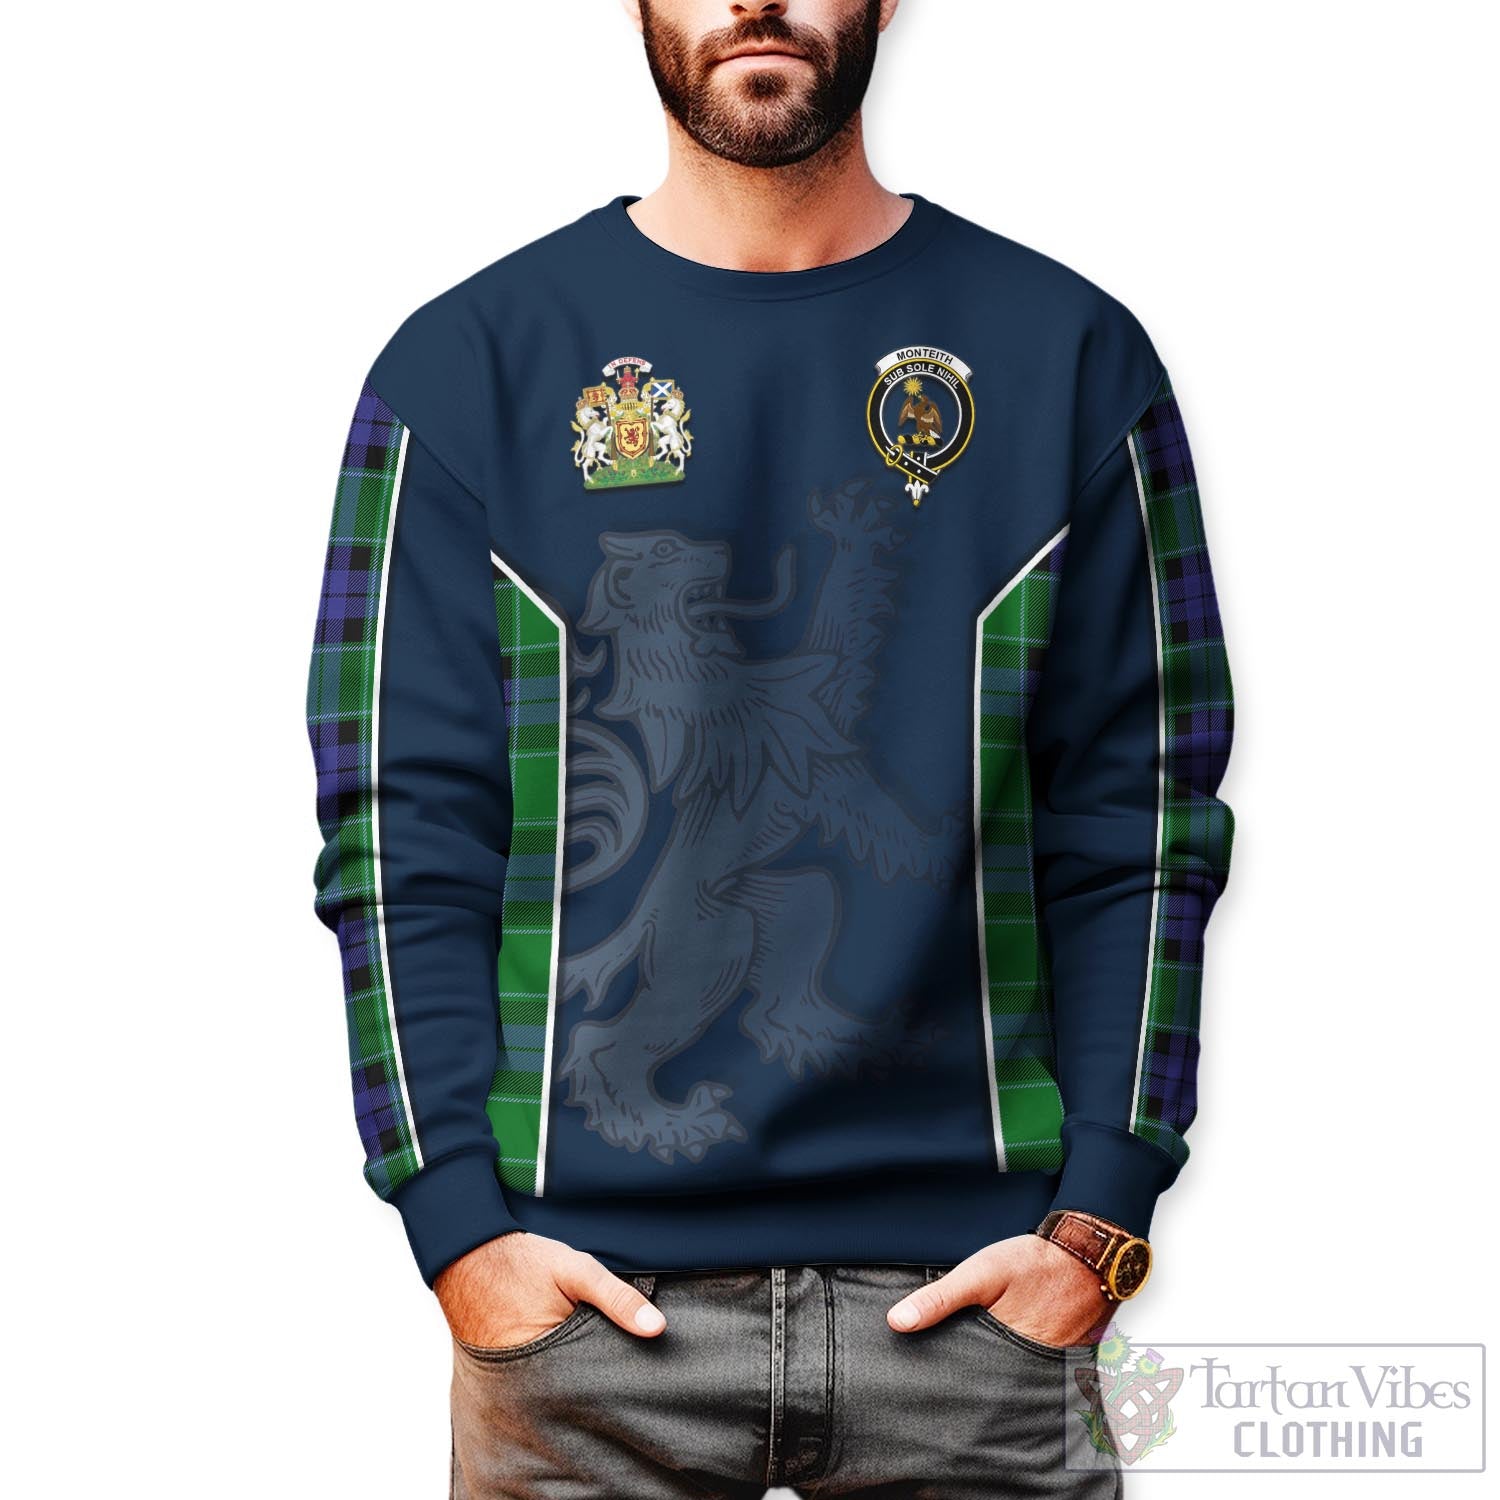 Tartan Vibes Clothing Monteith Tartan Sweater with Family Crest and Lion Rampant Vibes Sport Style